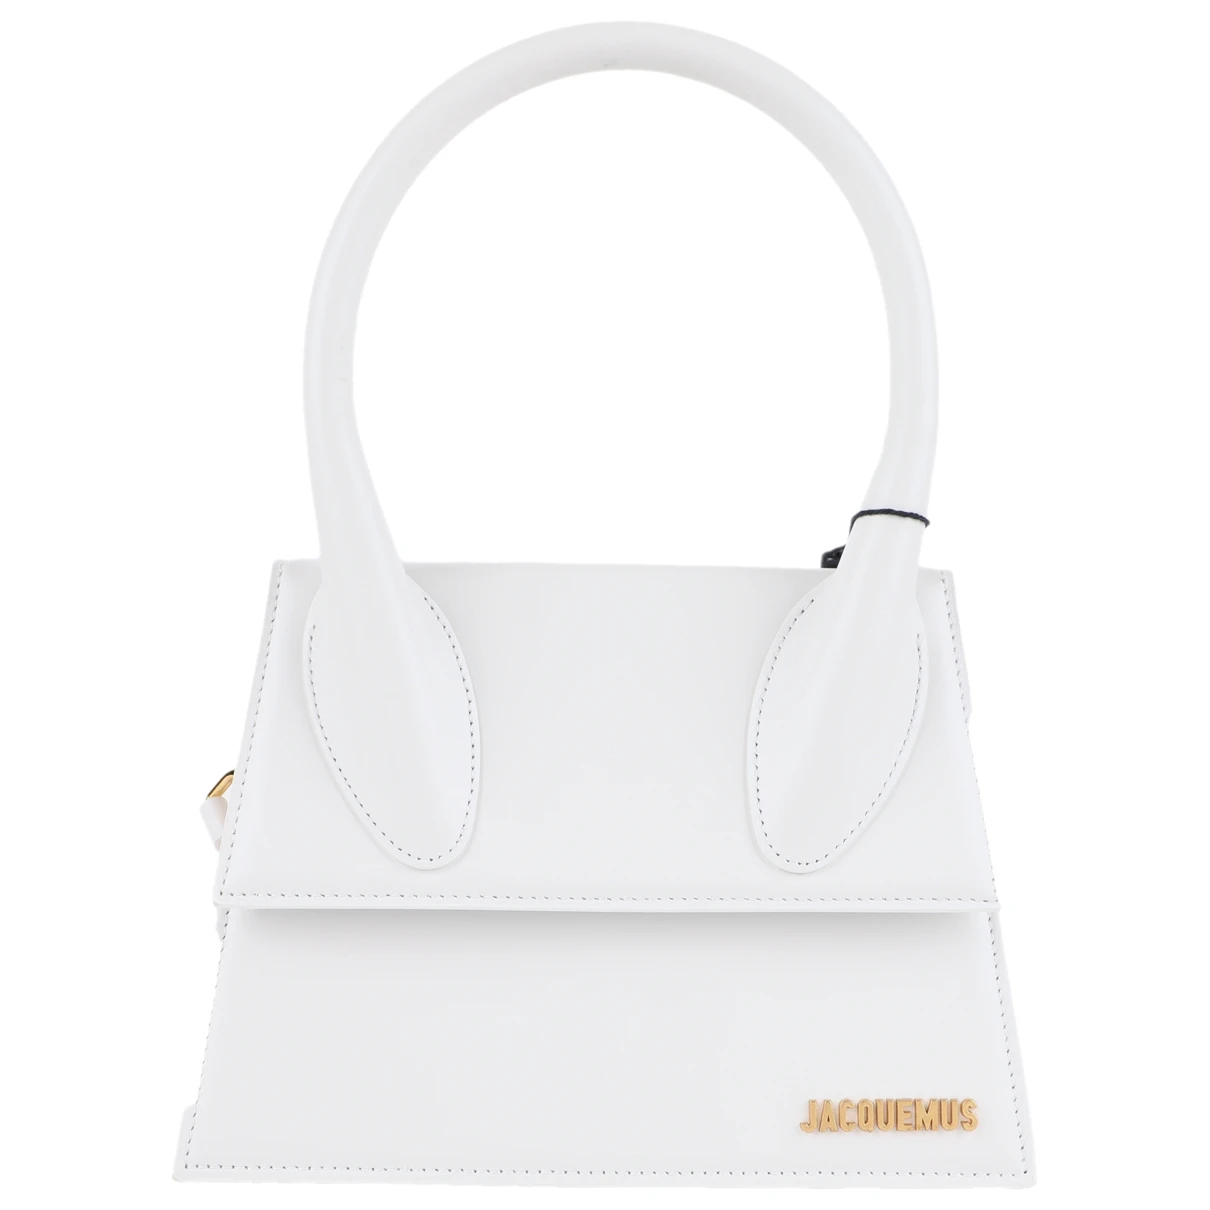 Pre-owned Jacquemus Chiquito Leather Crossbody Bag In White